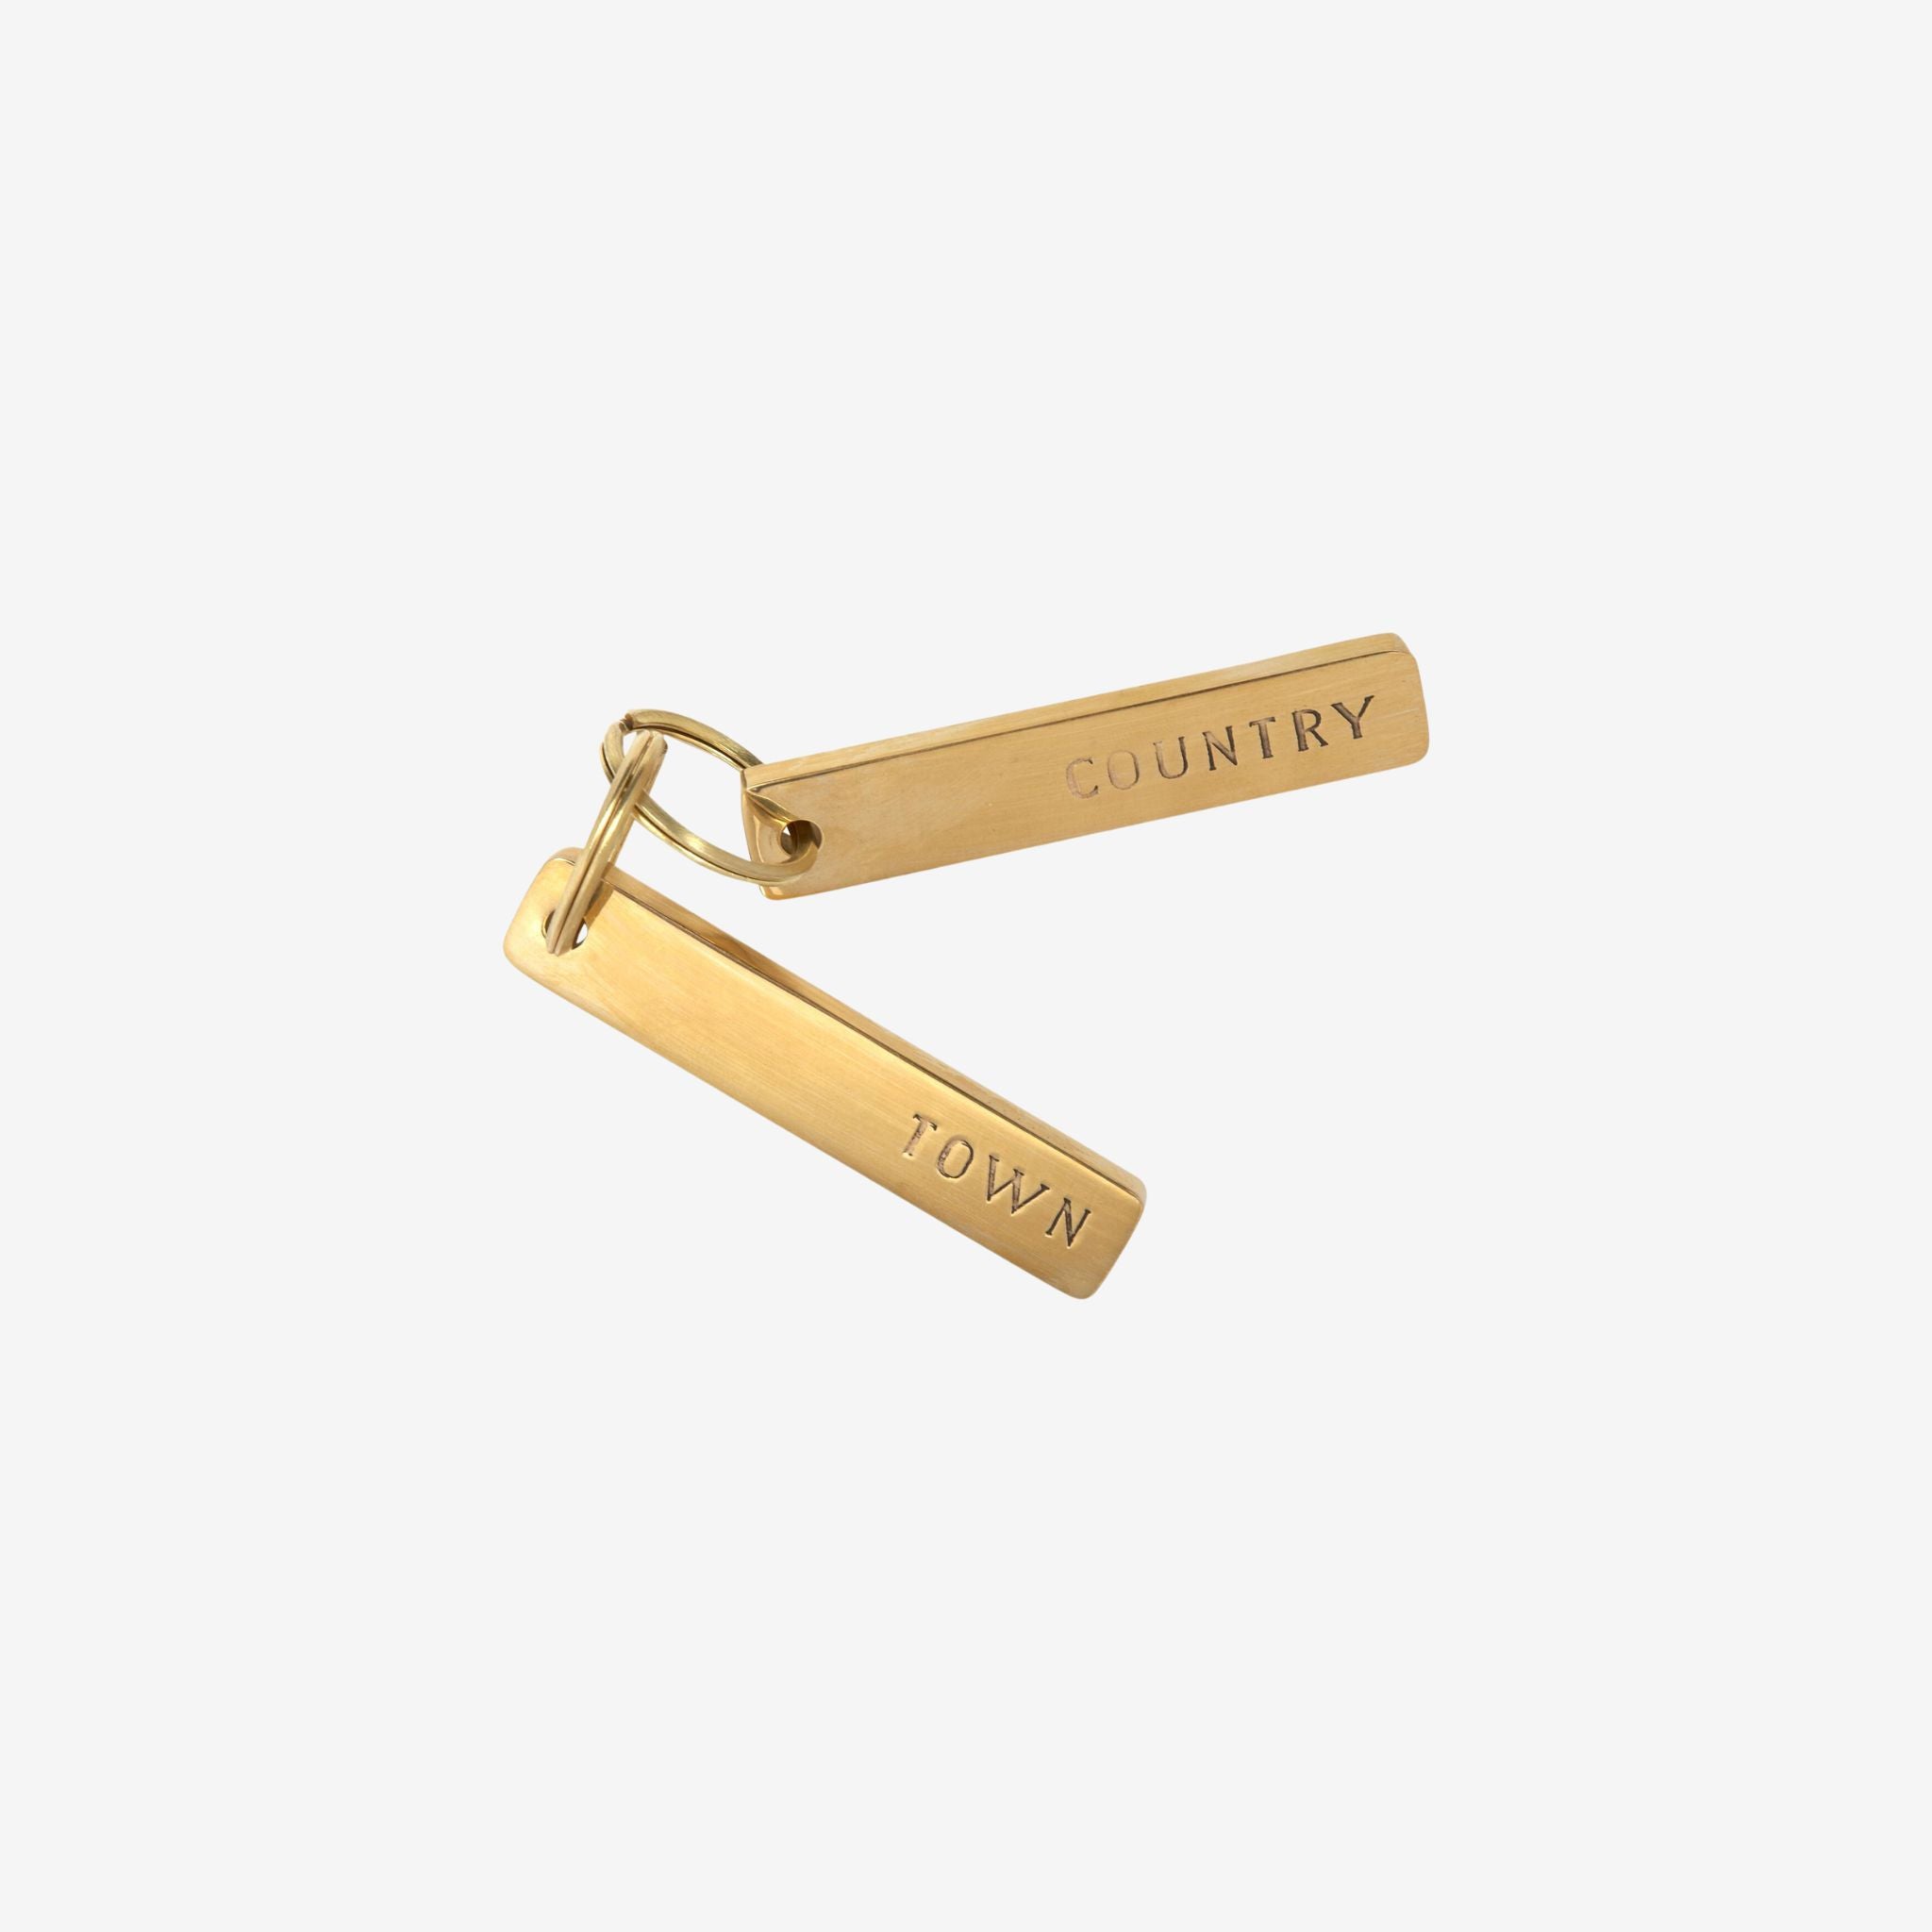 BRASS TOWN/COUNTRY KEY CHAIN PAIR